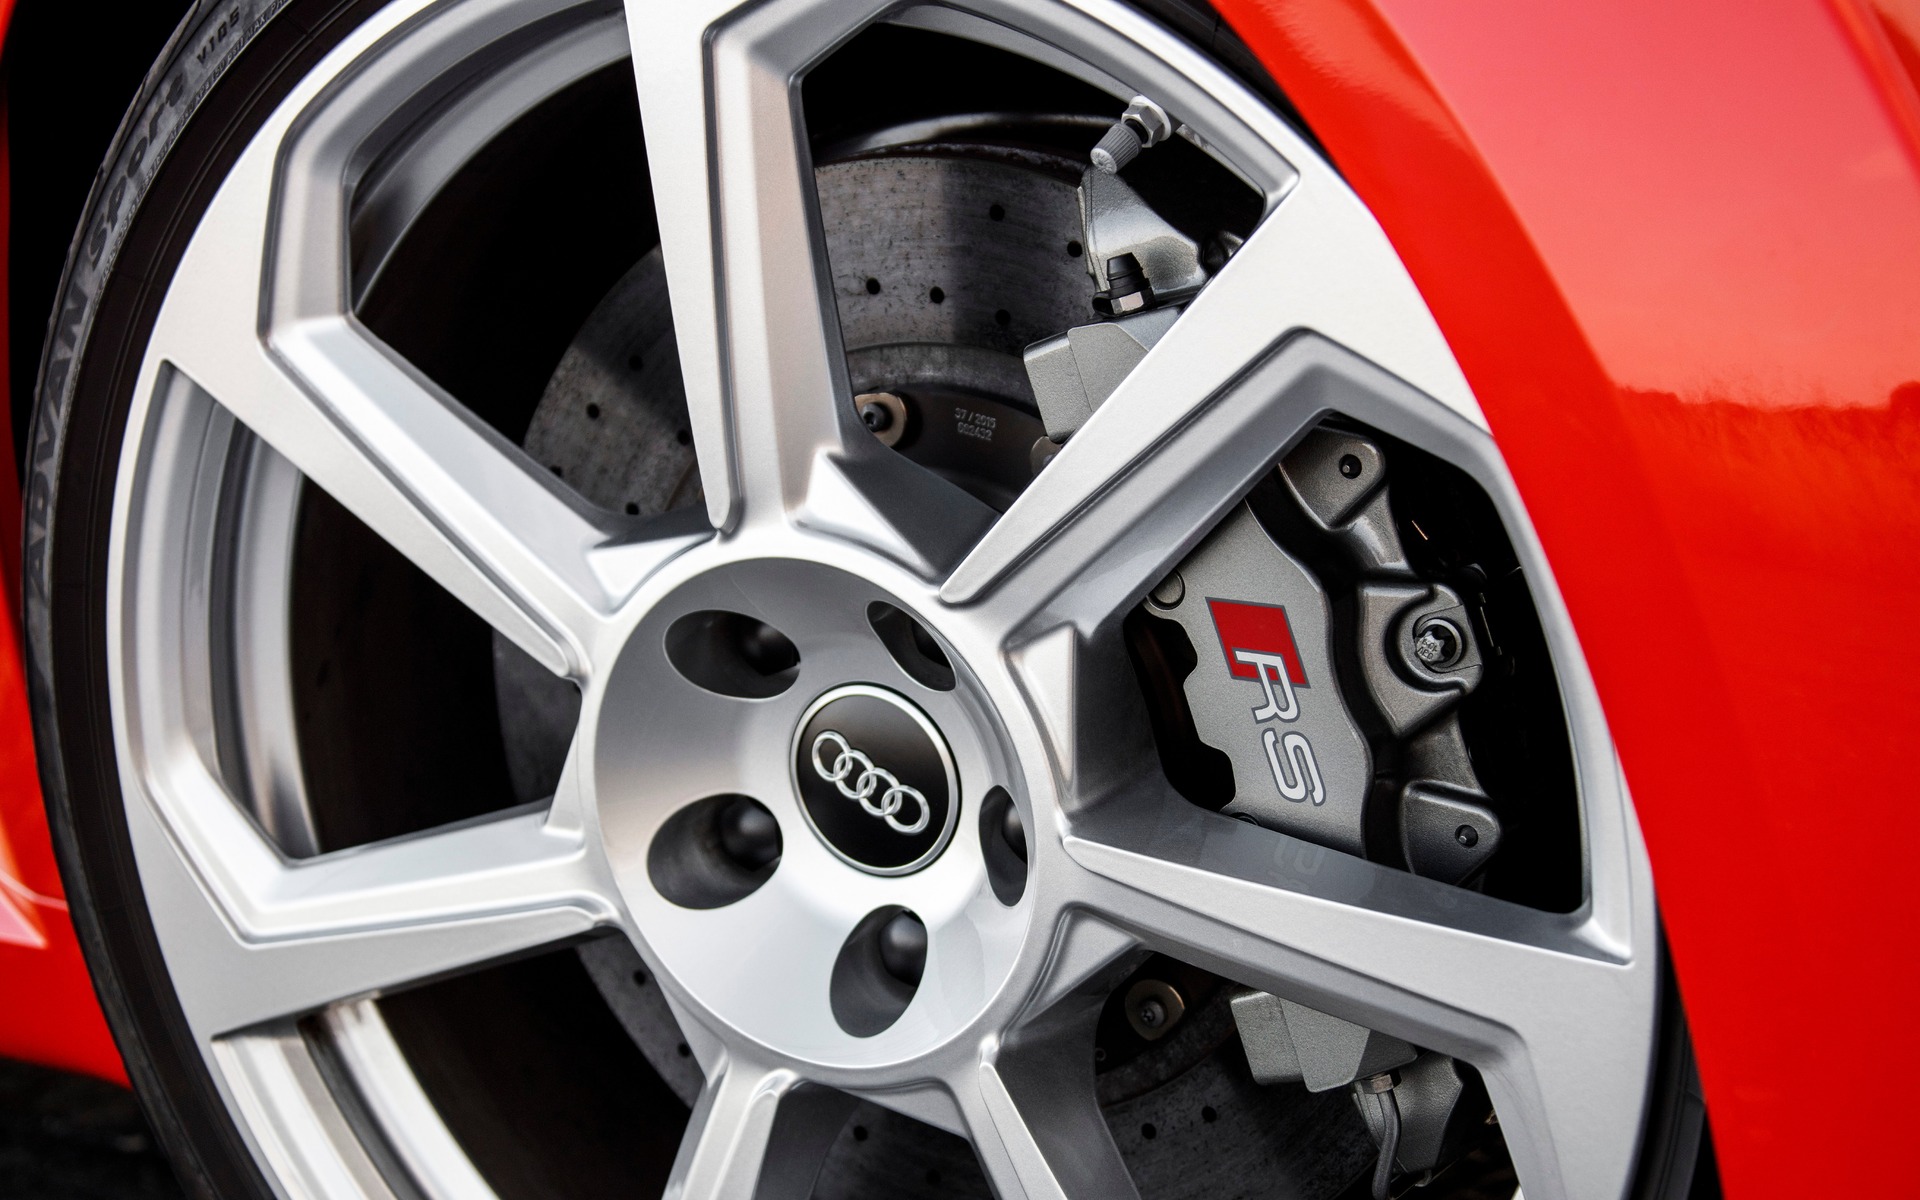 19-inch alloy rims and optional ceramic composite front brakes.